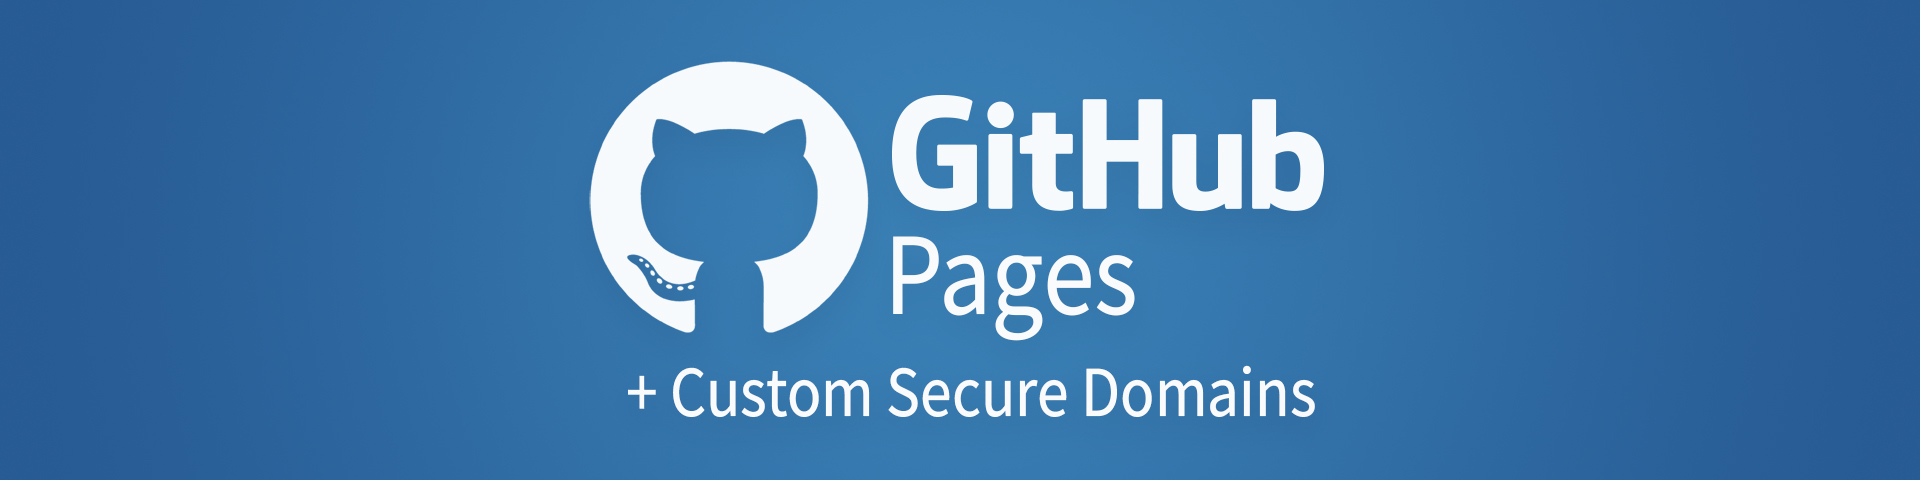 Custom secure domains with GitHub Pages